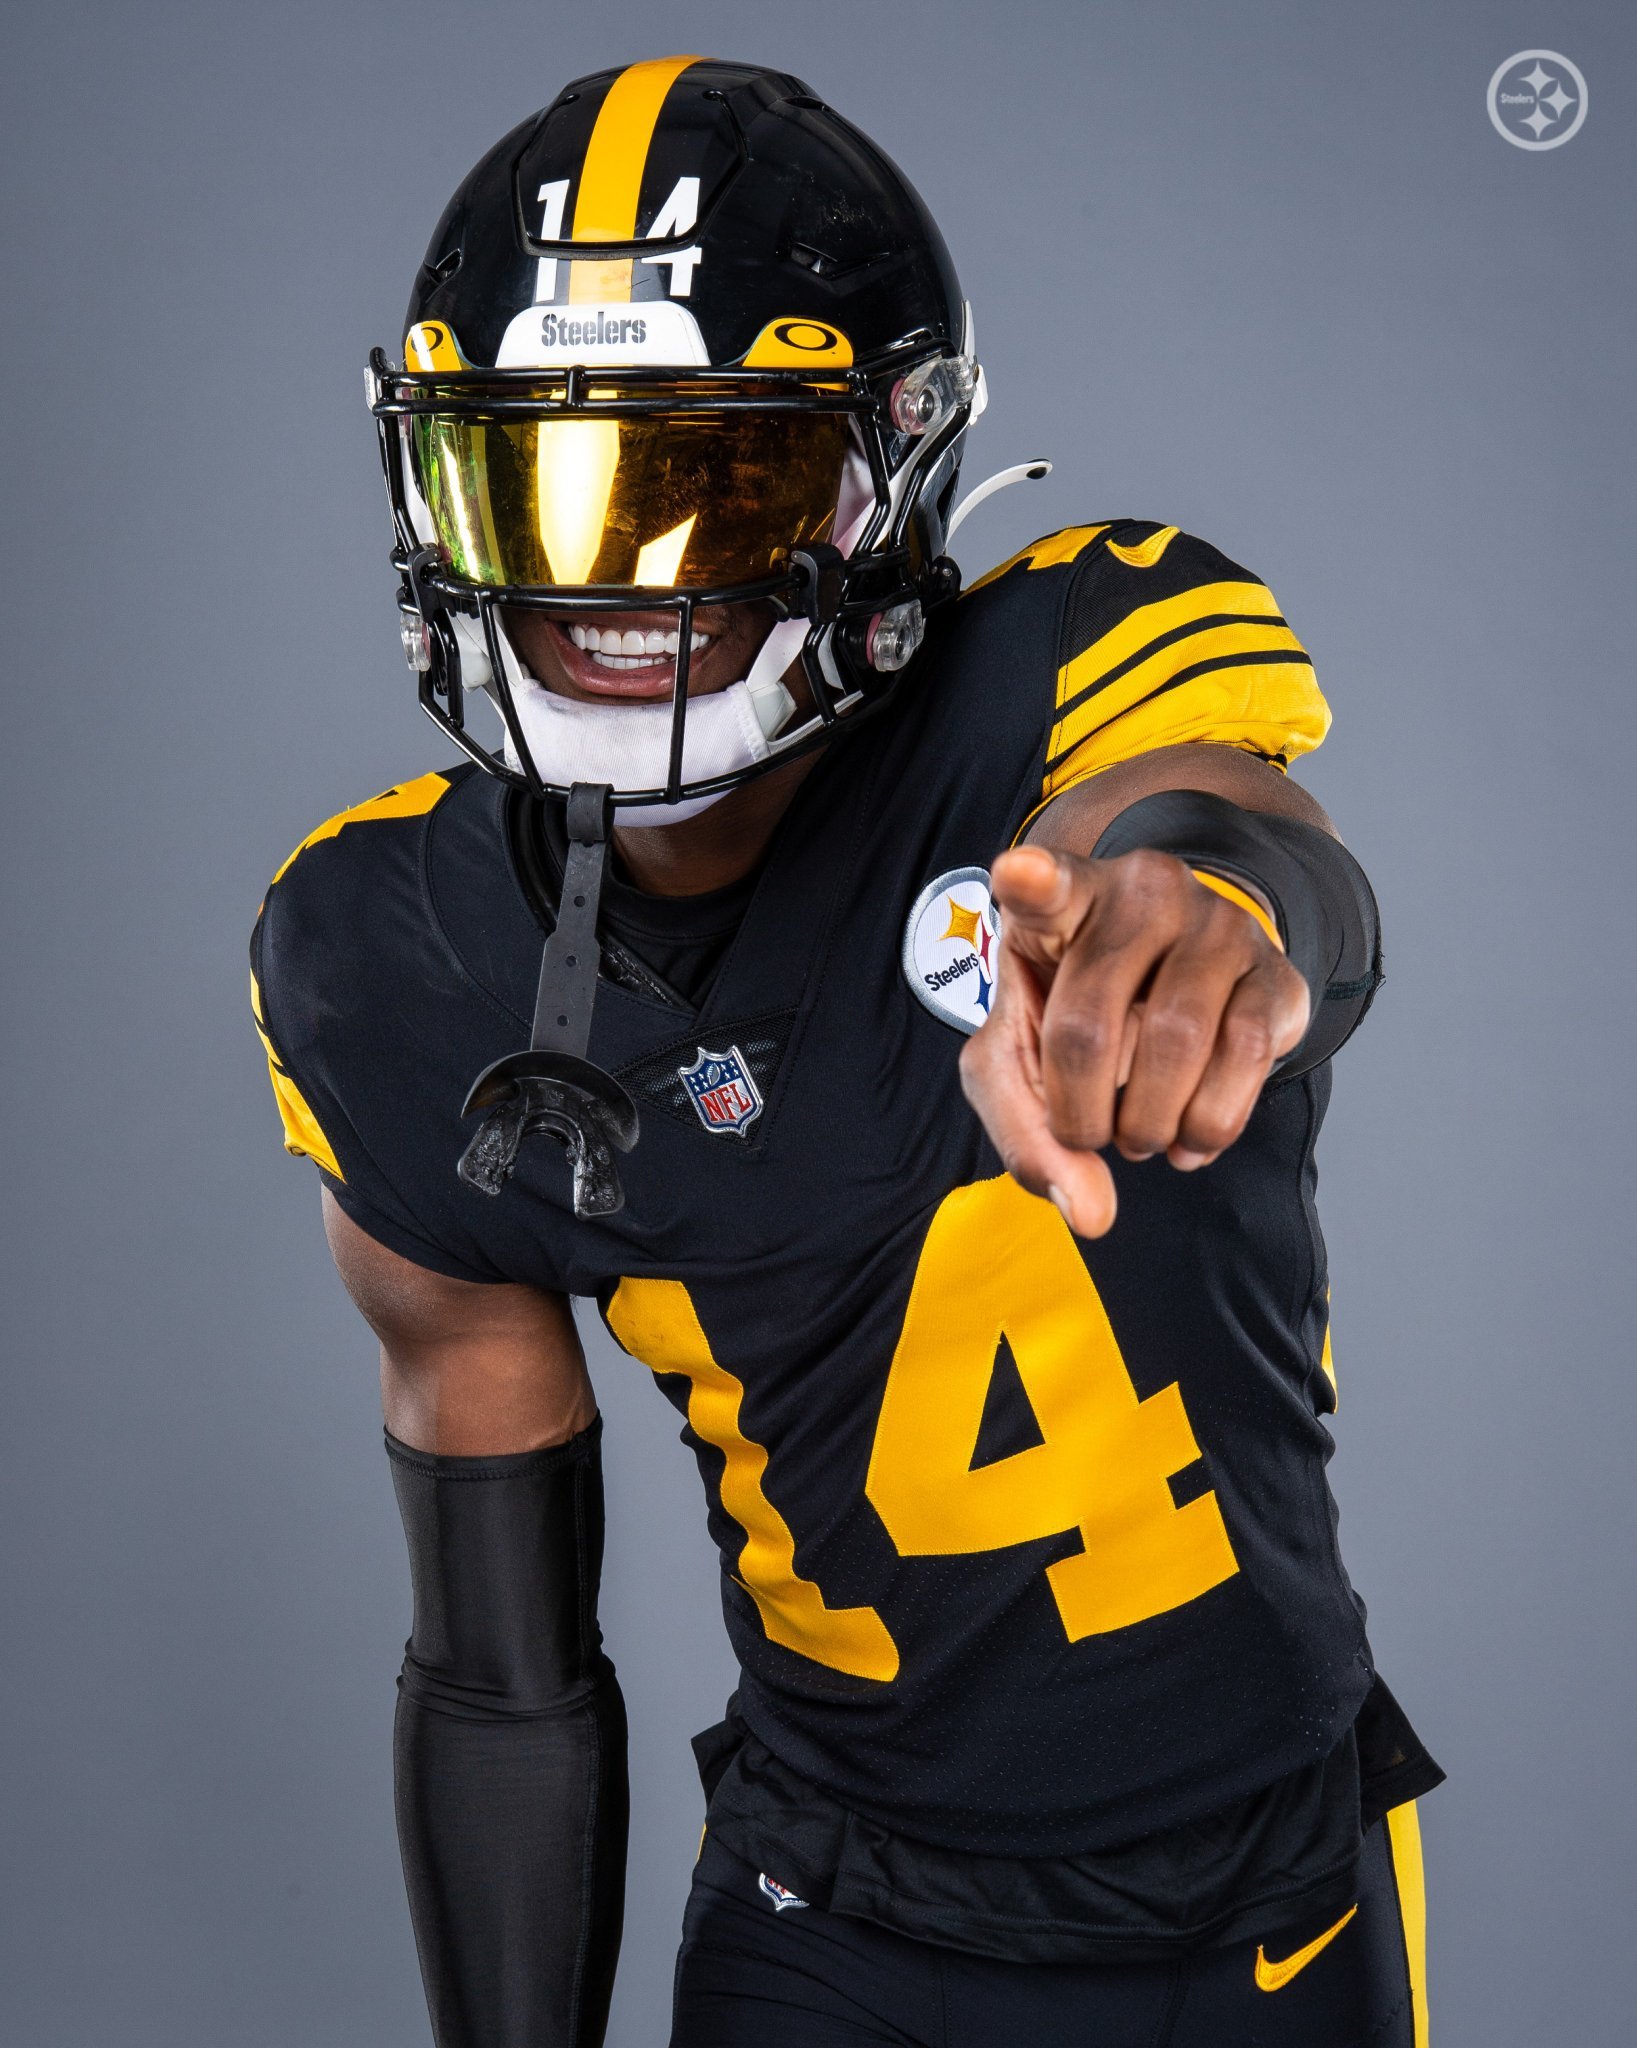 steelers new color rush